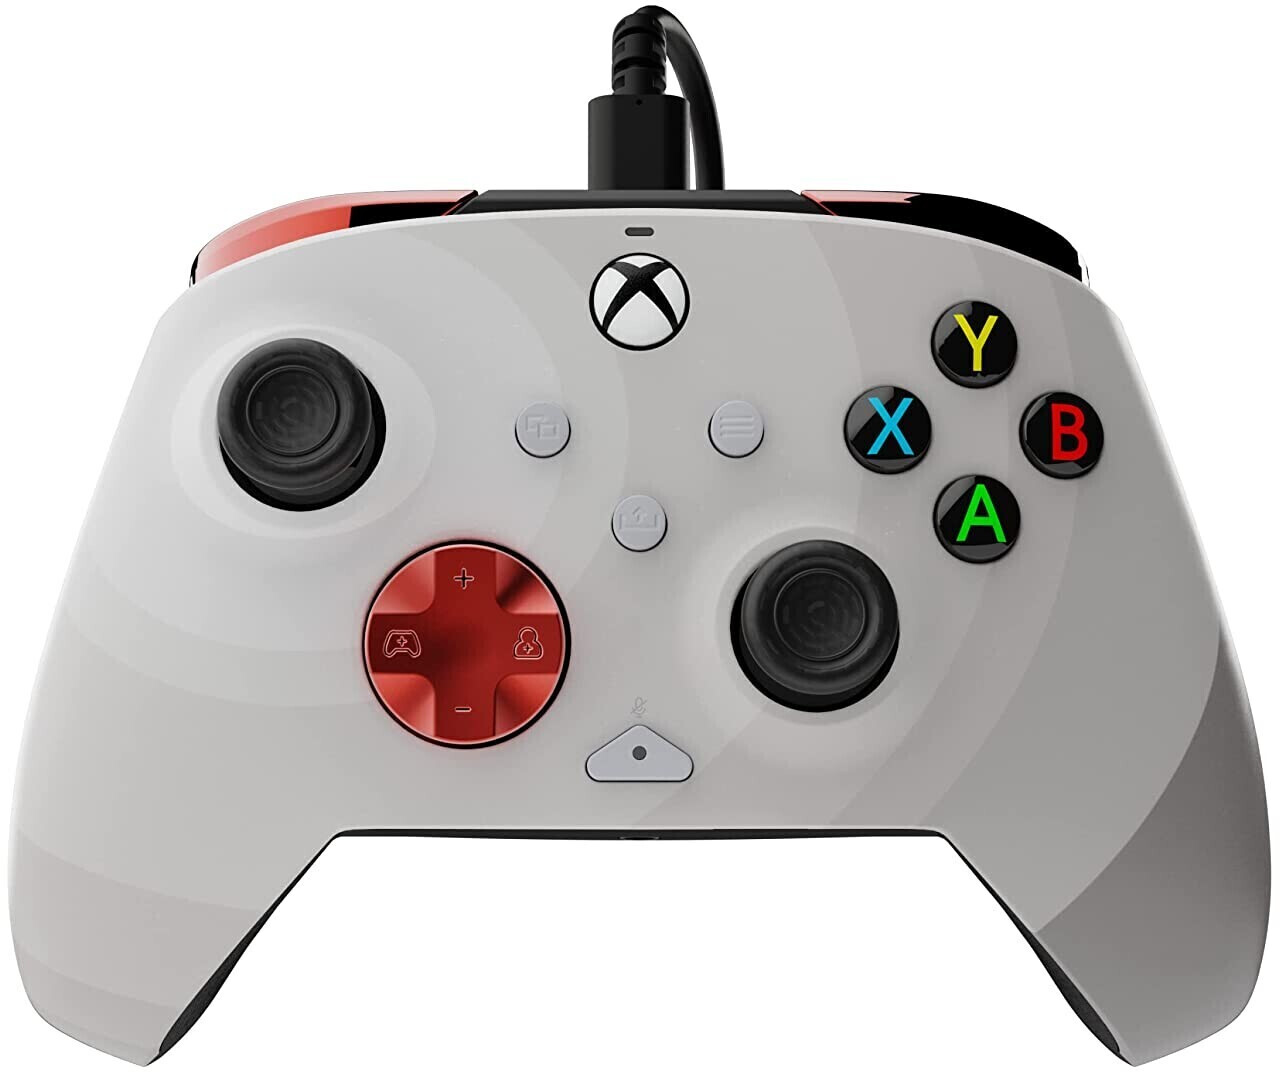 Xbox Series X|S Spirit Red AIRLITE Headset/REMATCH Controller Bundle by PDP